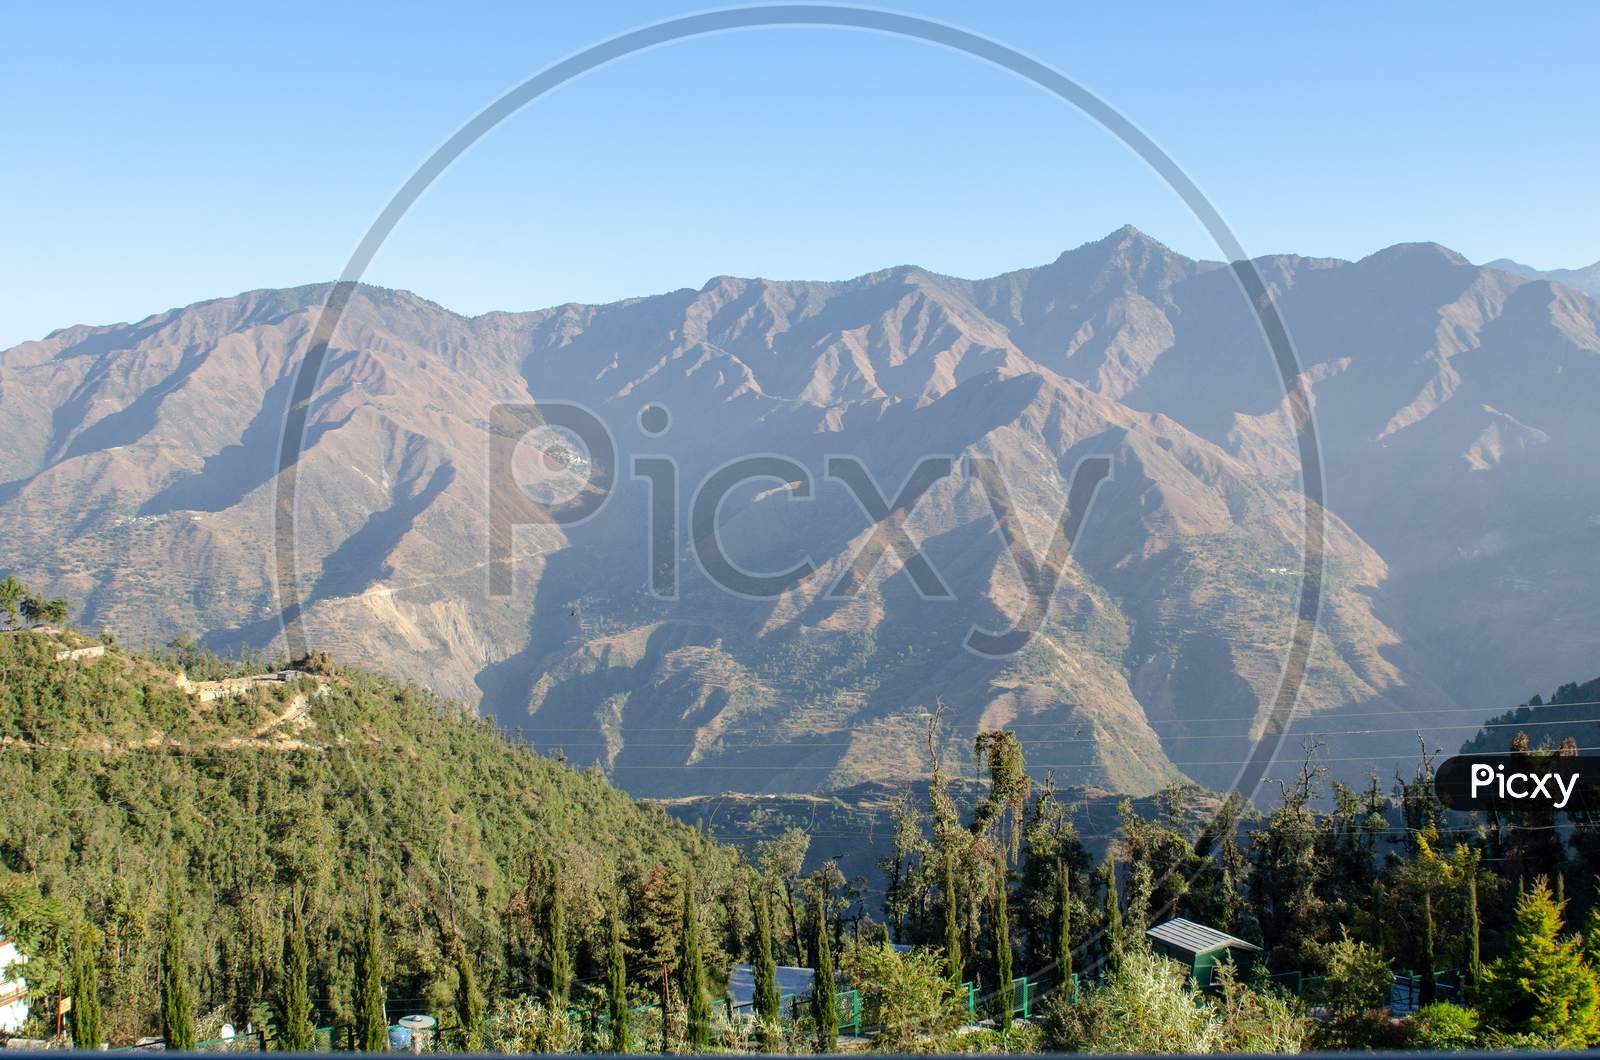 Landscape of Summit Rock Mountain With Deodar Trees in Foreground At  Mussoorie